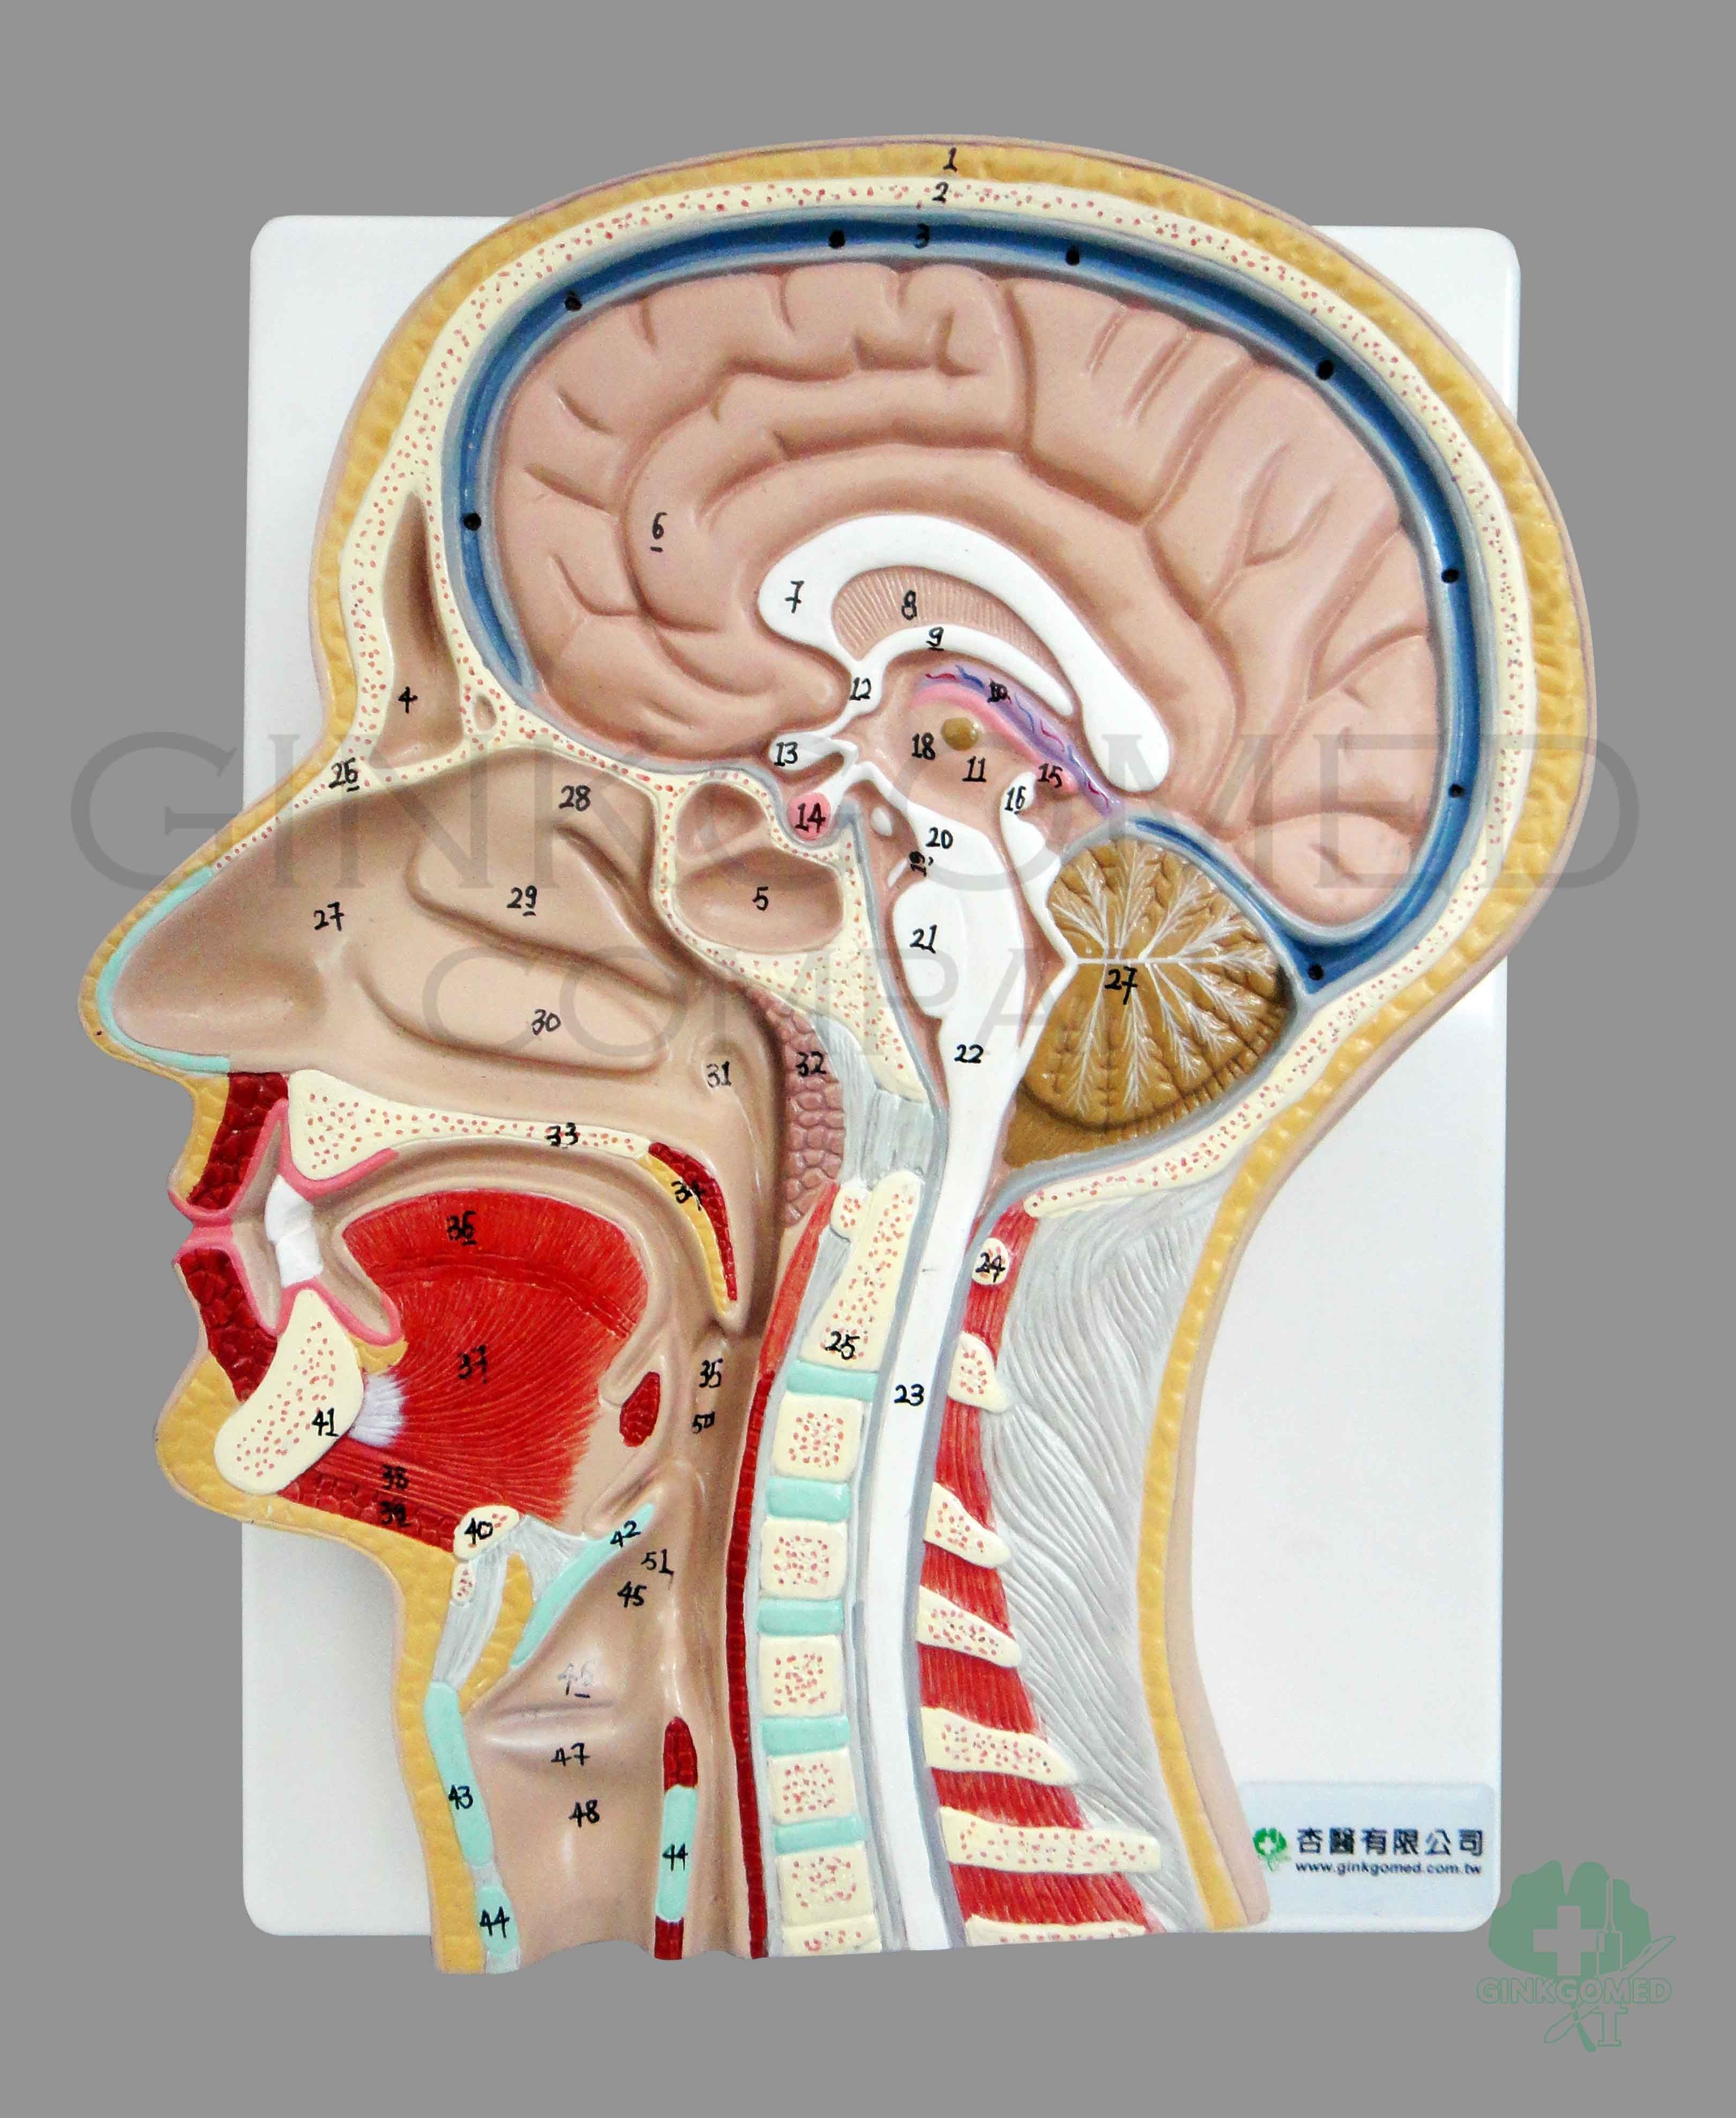 GM-080001 Sagittal Section of Head - Head, Neck, Nervous System and